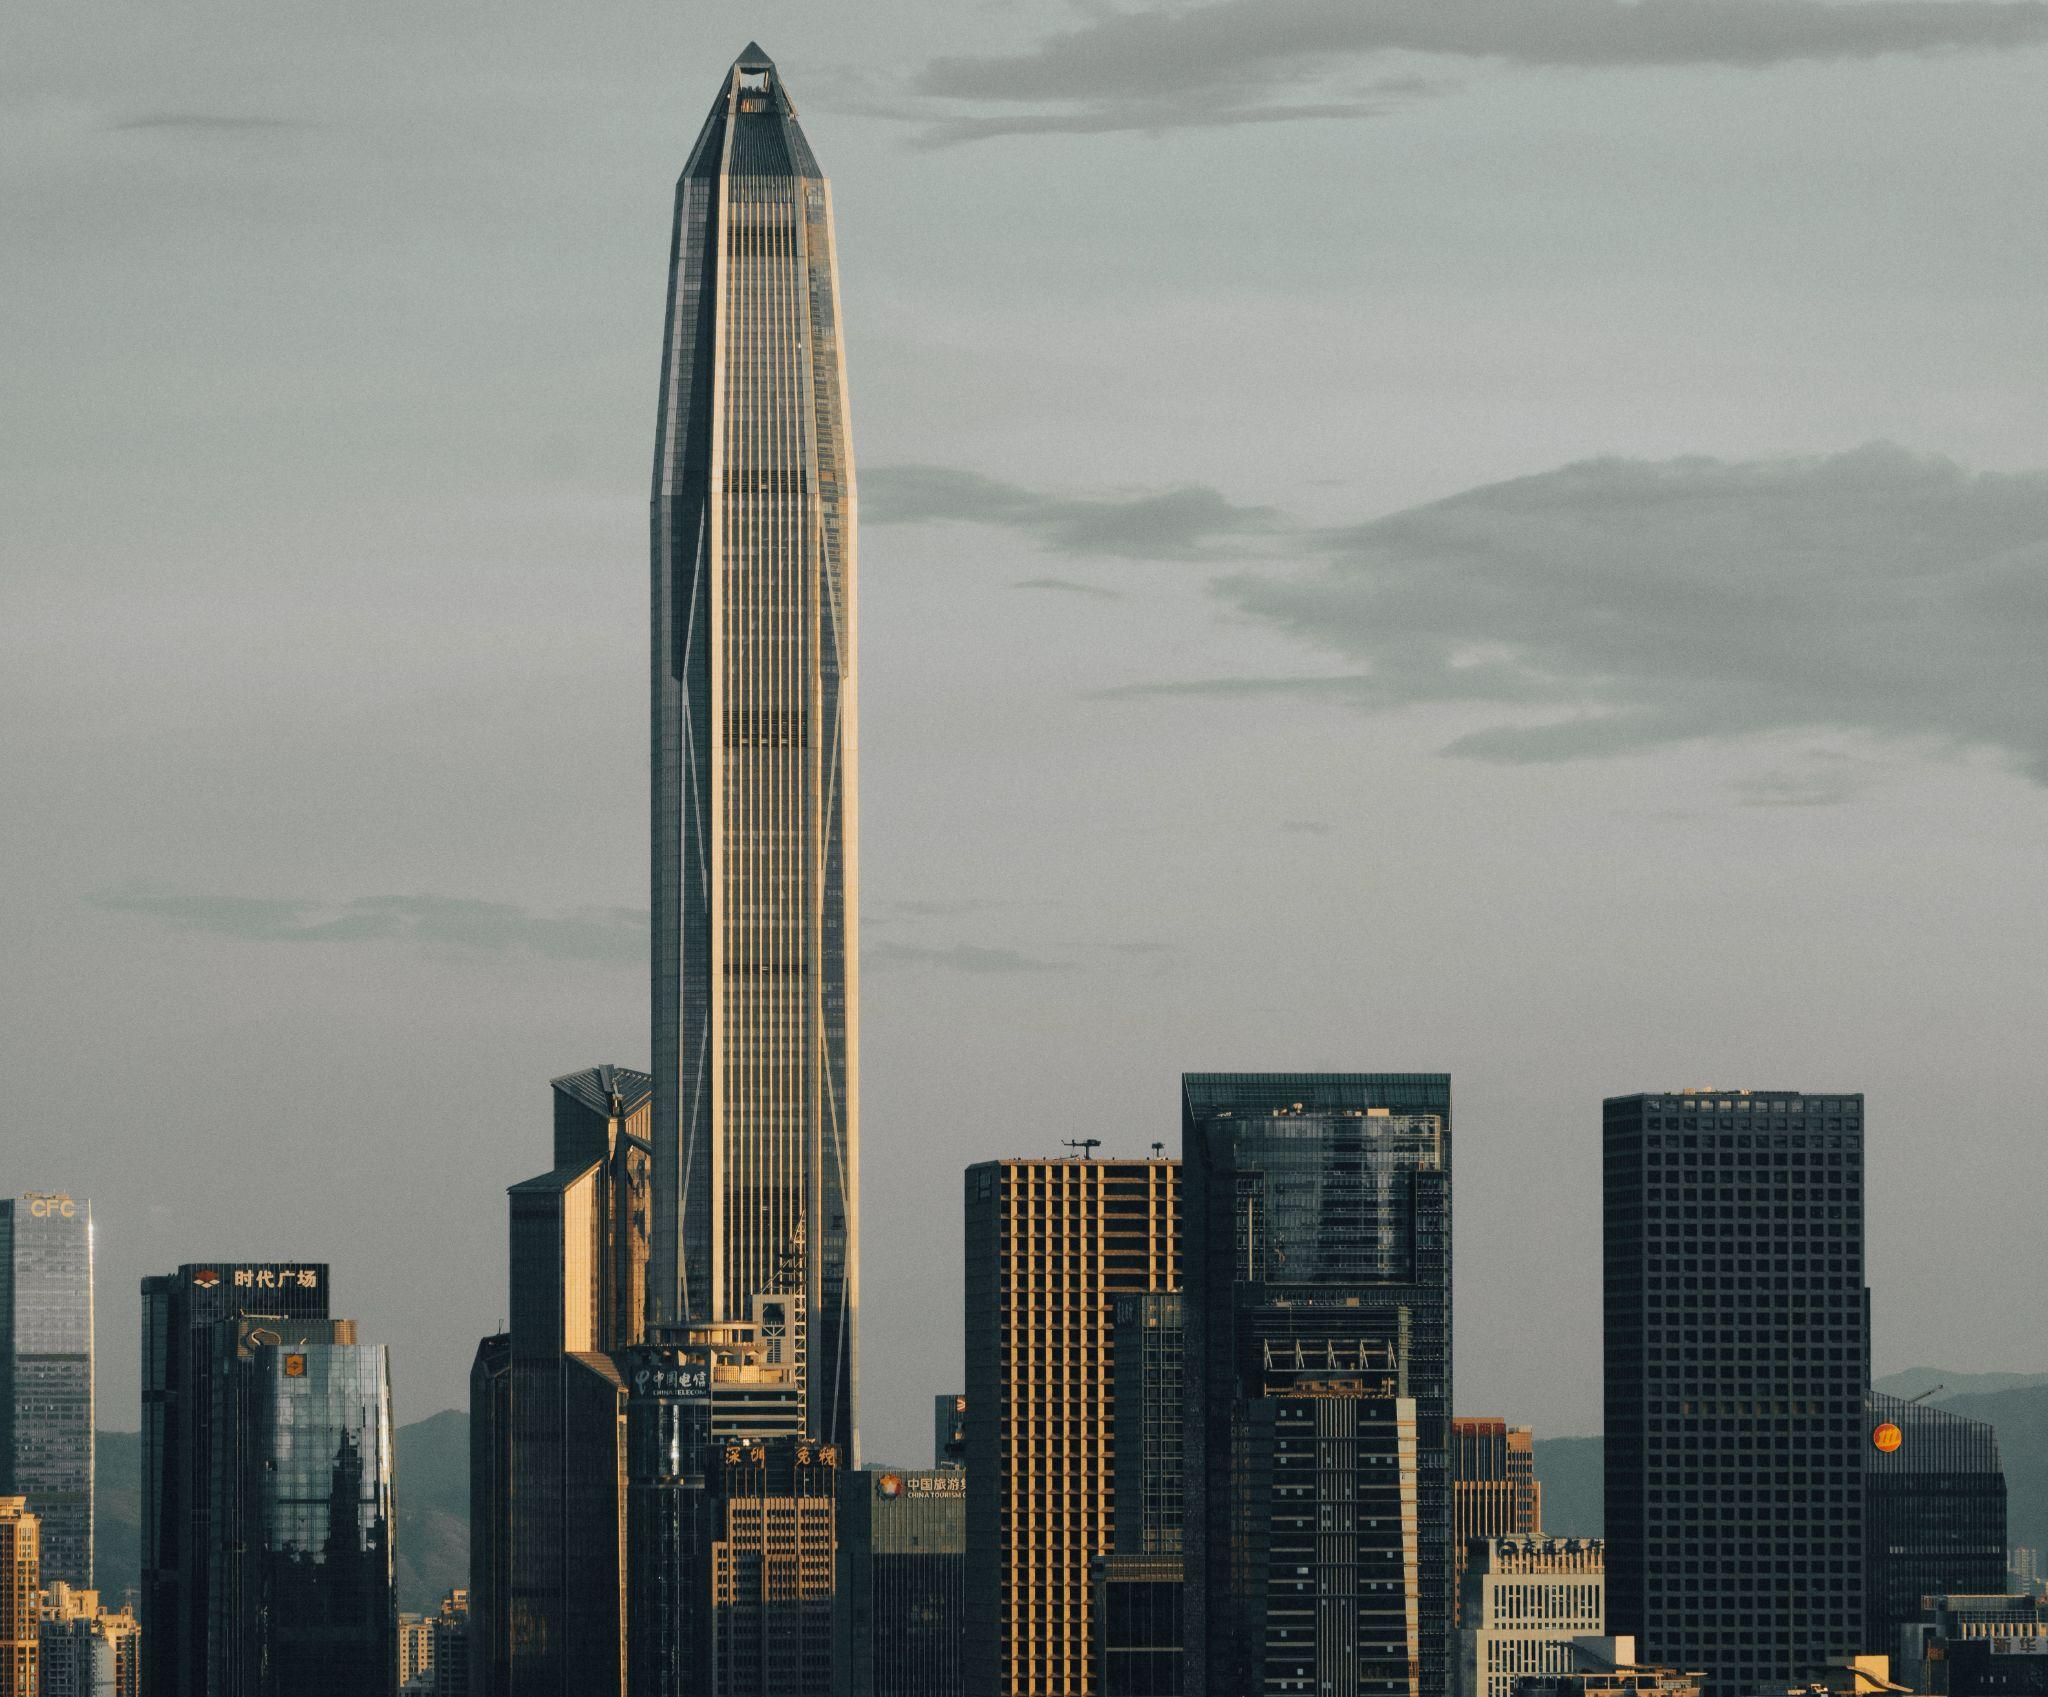 Ping An Finance Center, the financial and engineering giant